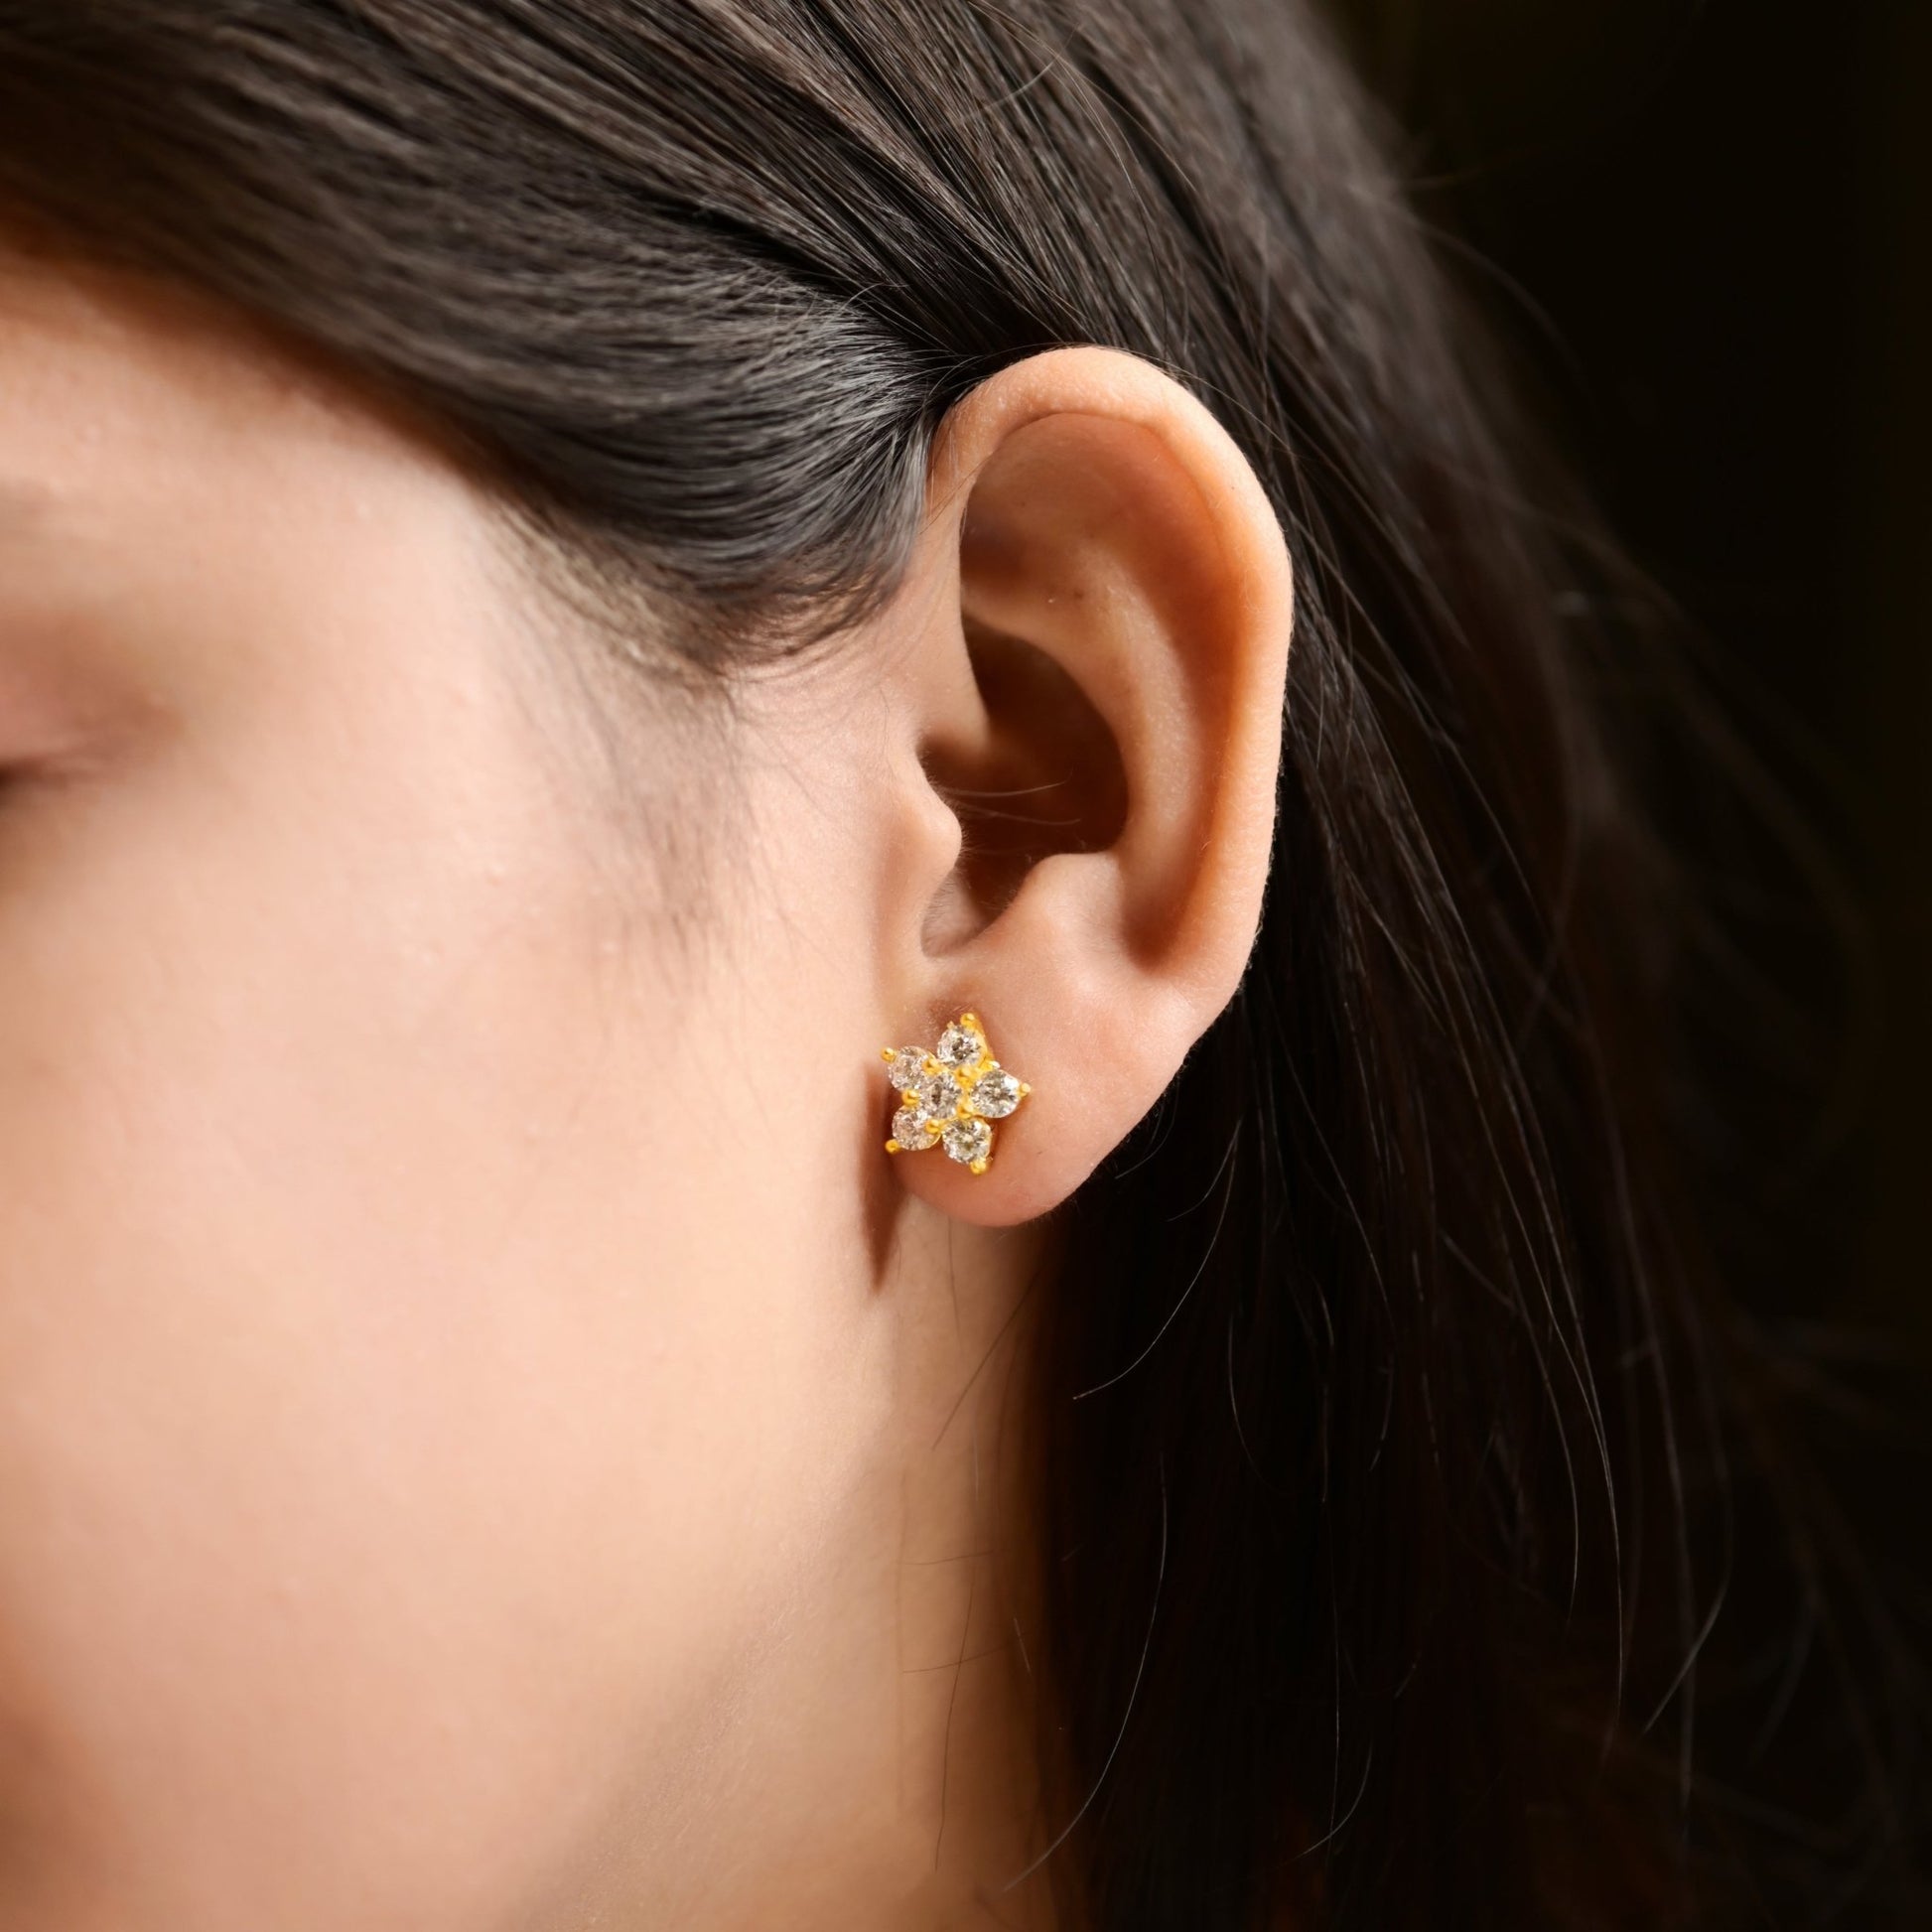 The Classic Crystal Blossom Earrings - Vinayak - House of Silver